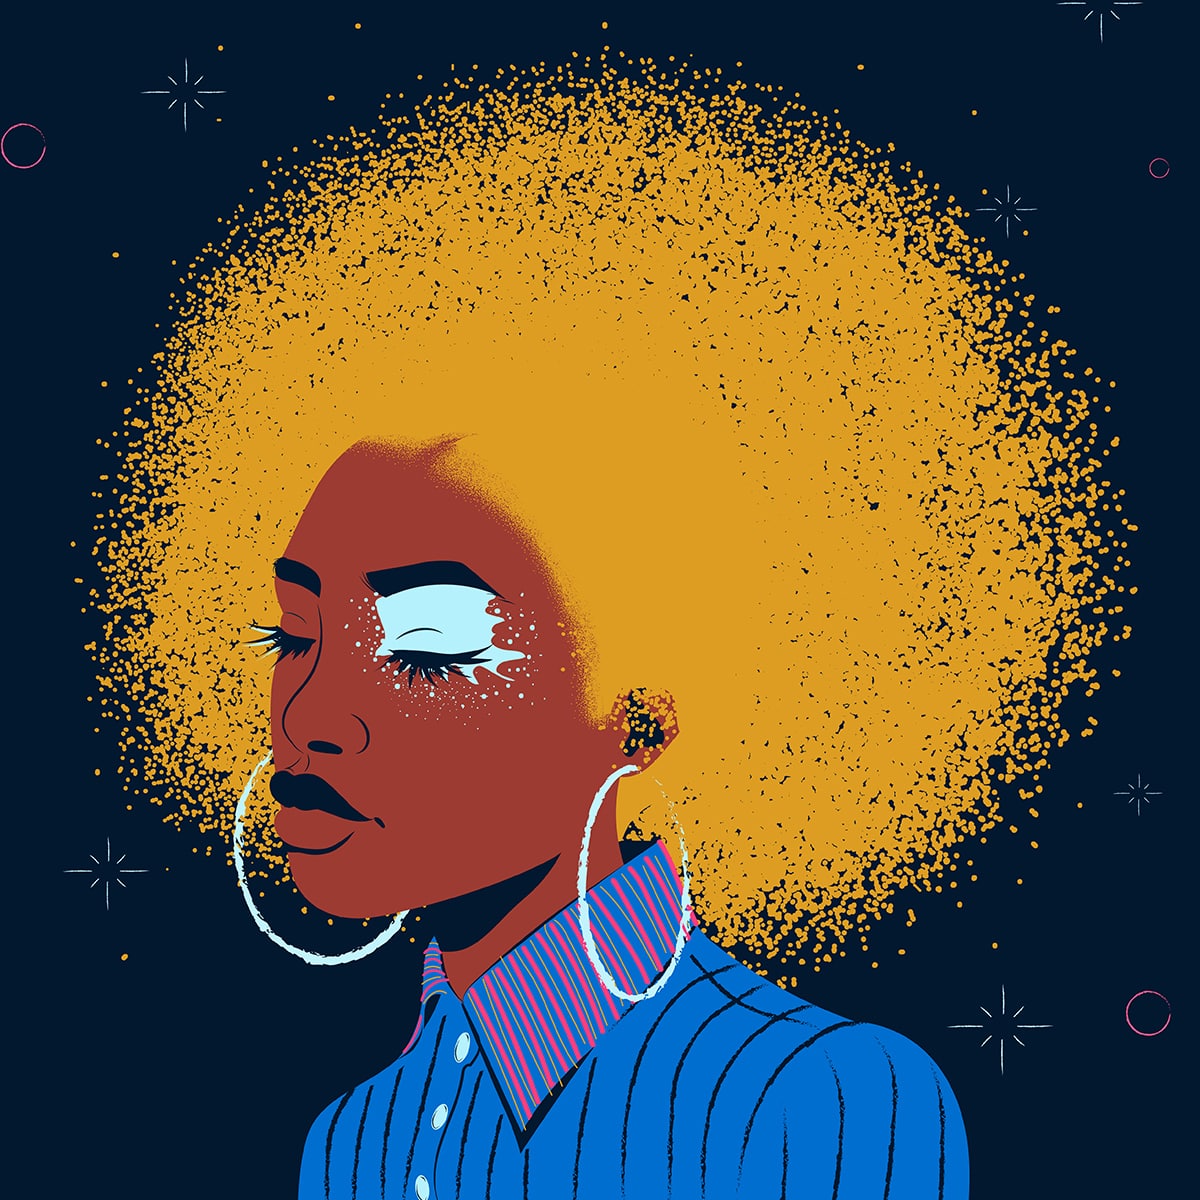 Illustration of black woman with afro and big earrings